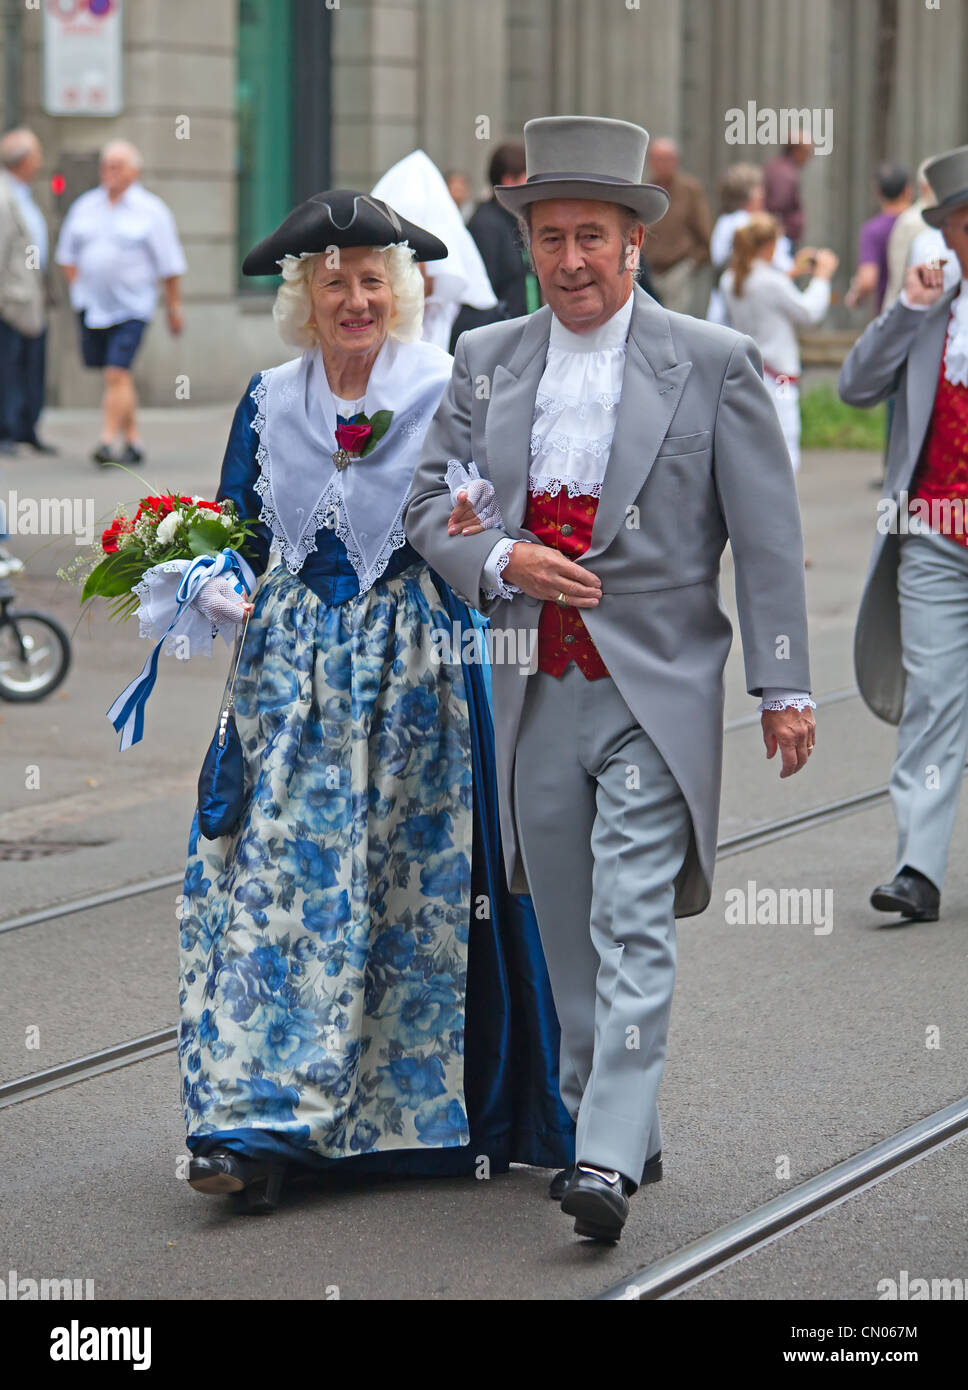 1st August costume parade in Zurich Stock Photo